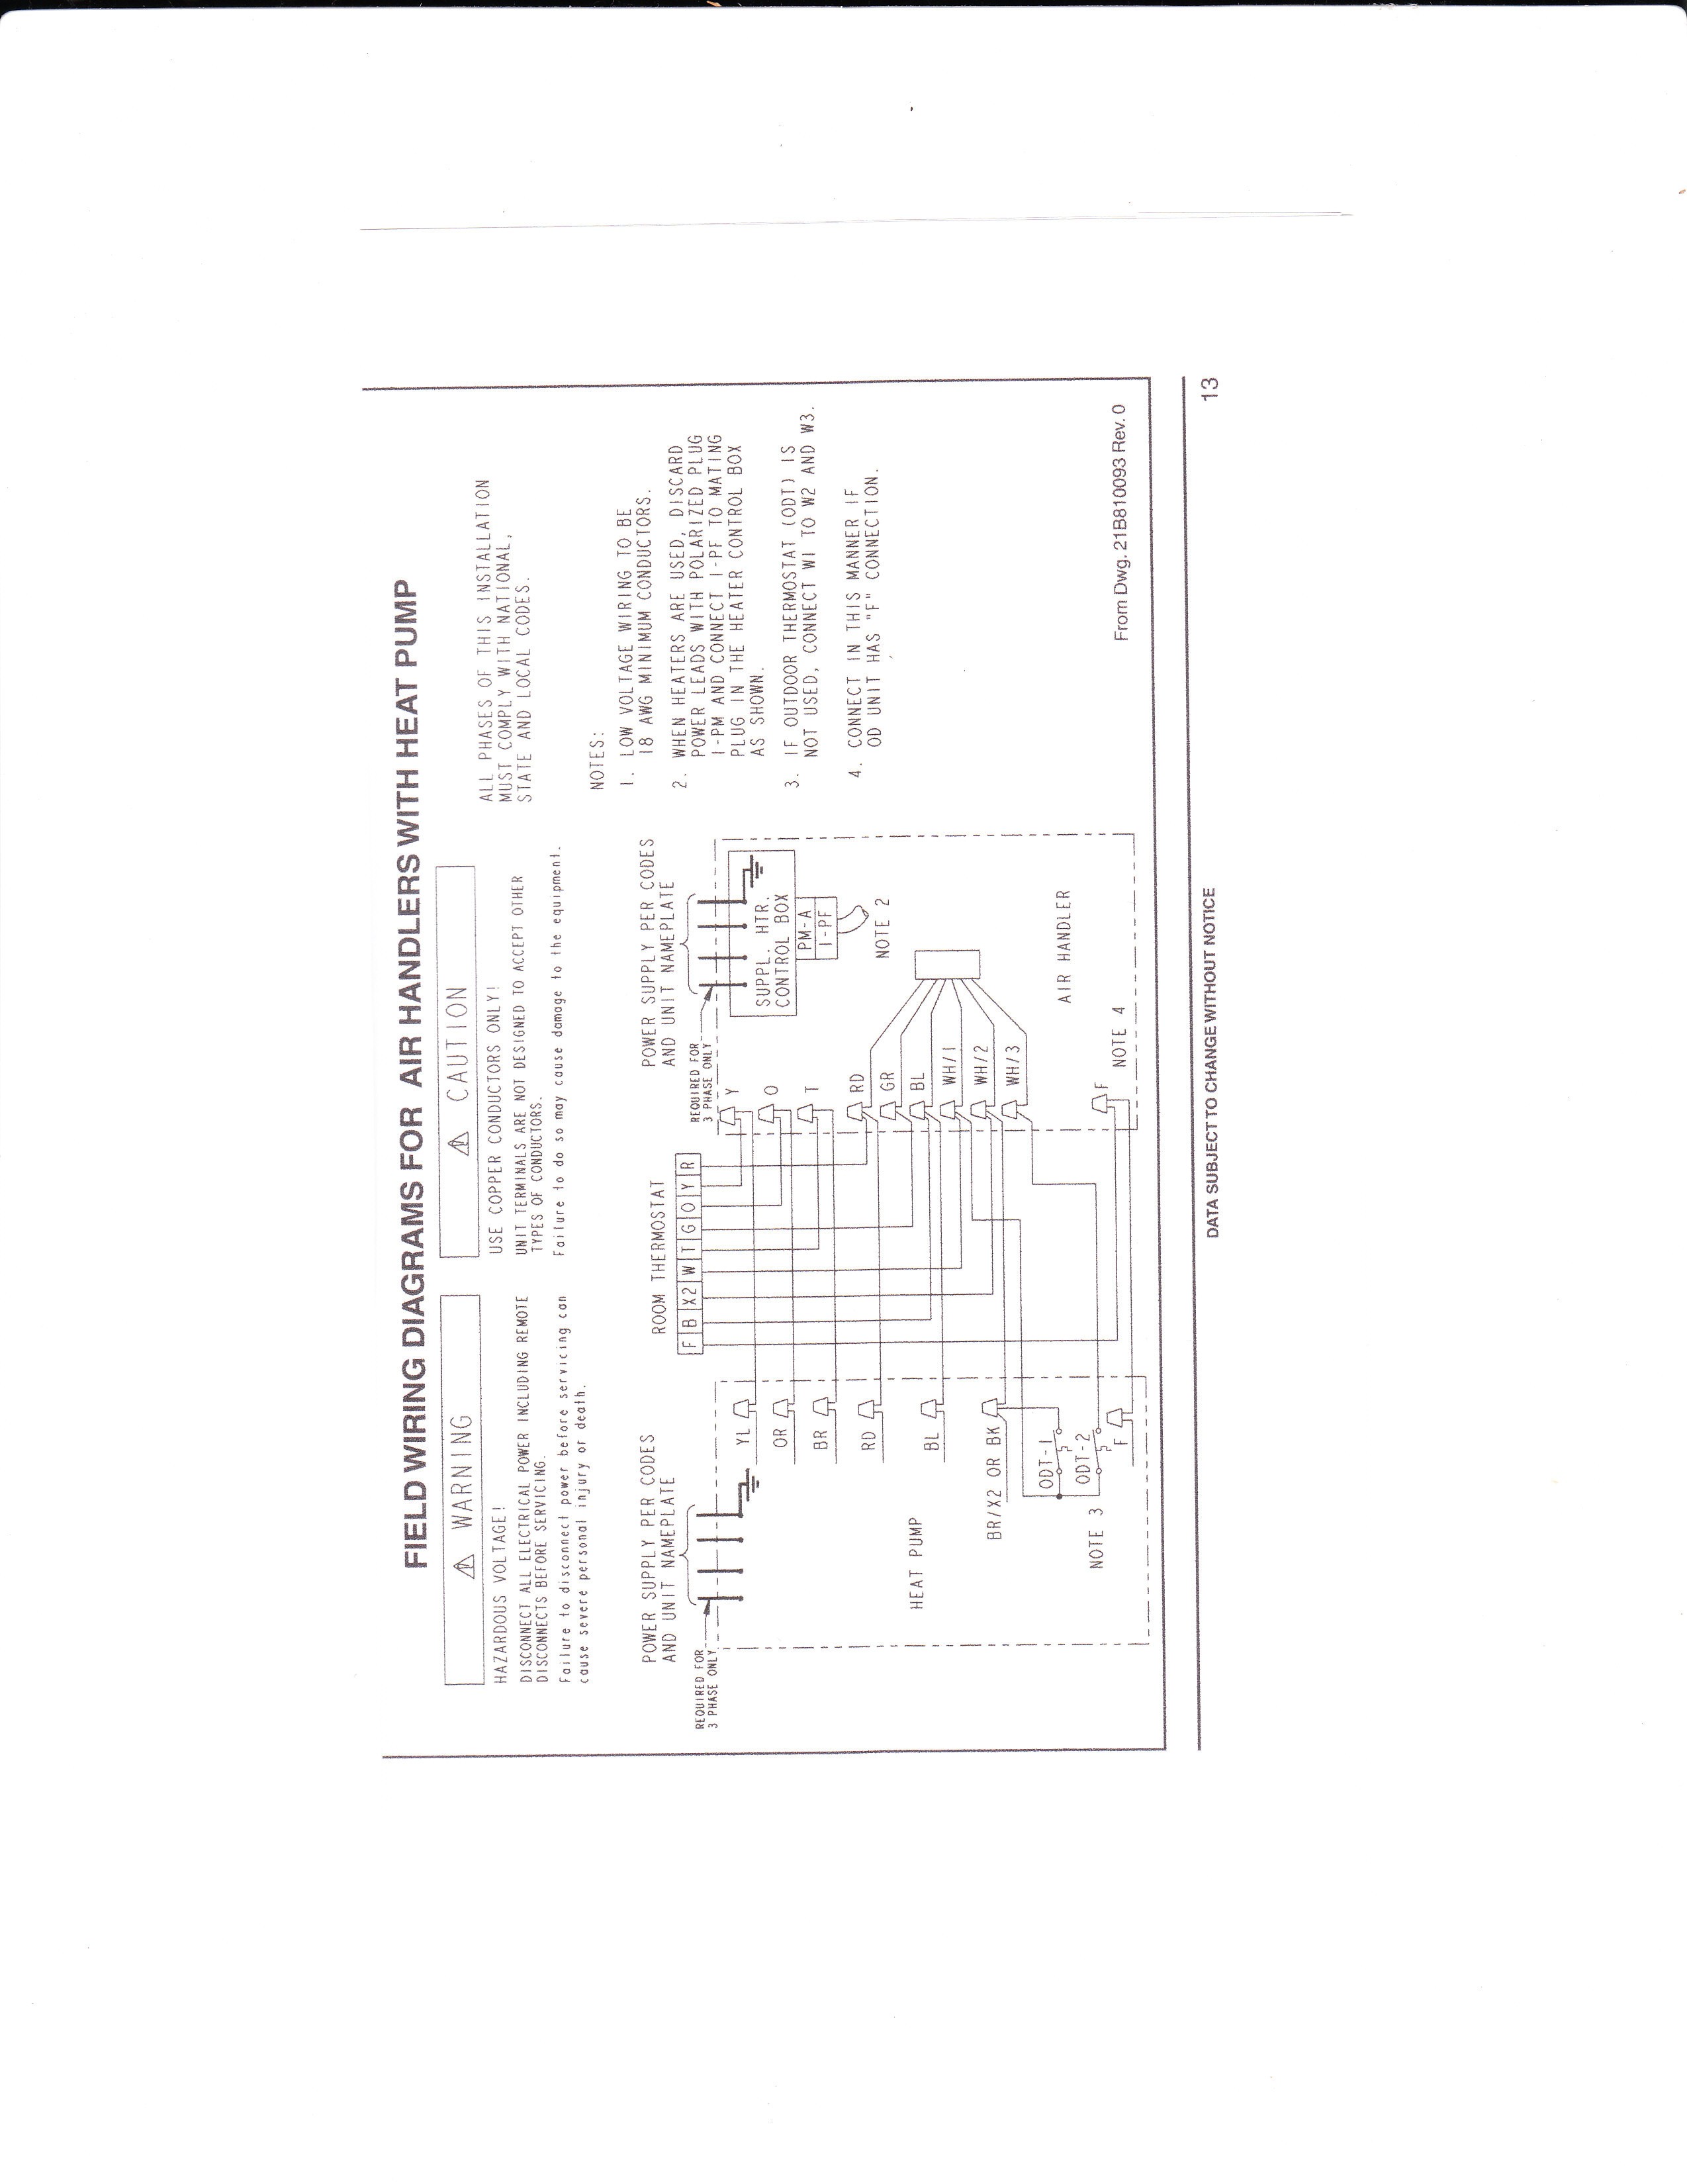 Wiring Diagram for Heating System Fresh Heating and Cooling 2 Wire thermostat Diagram